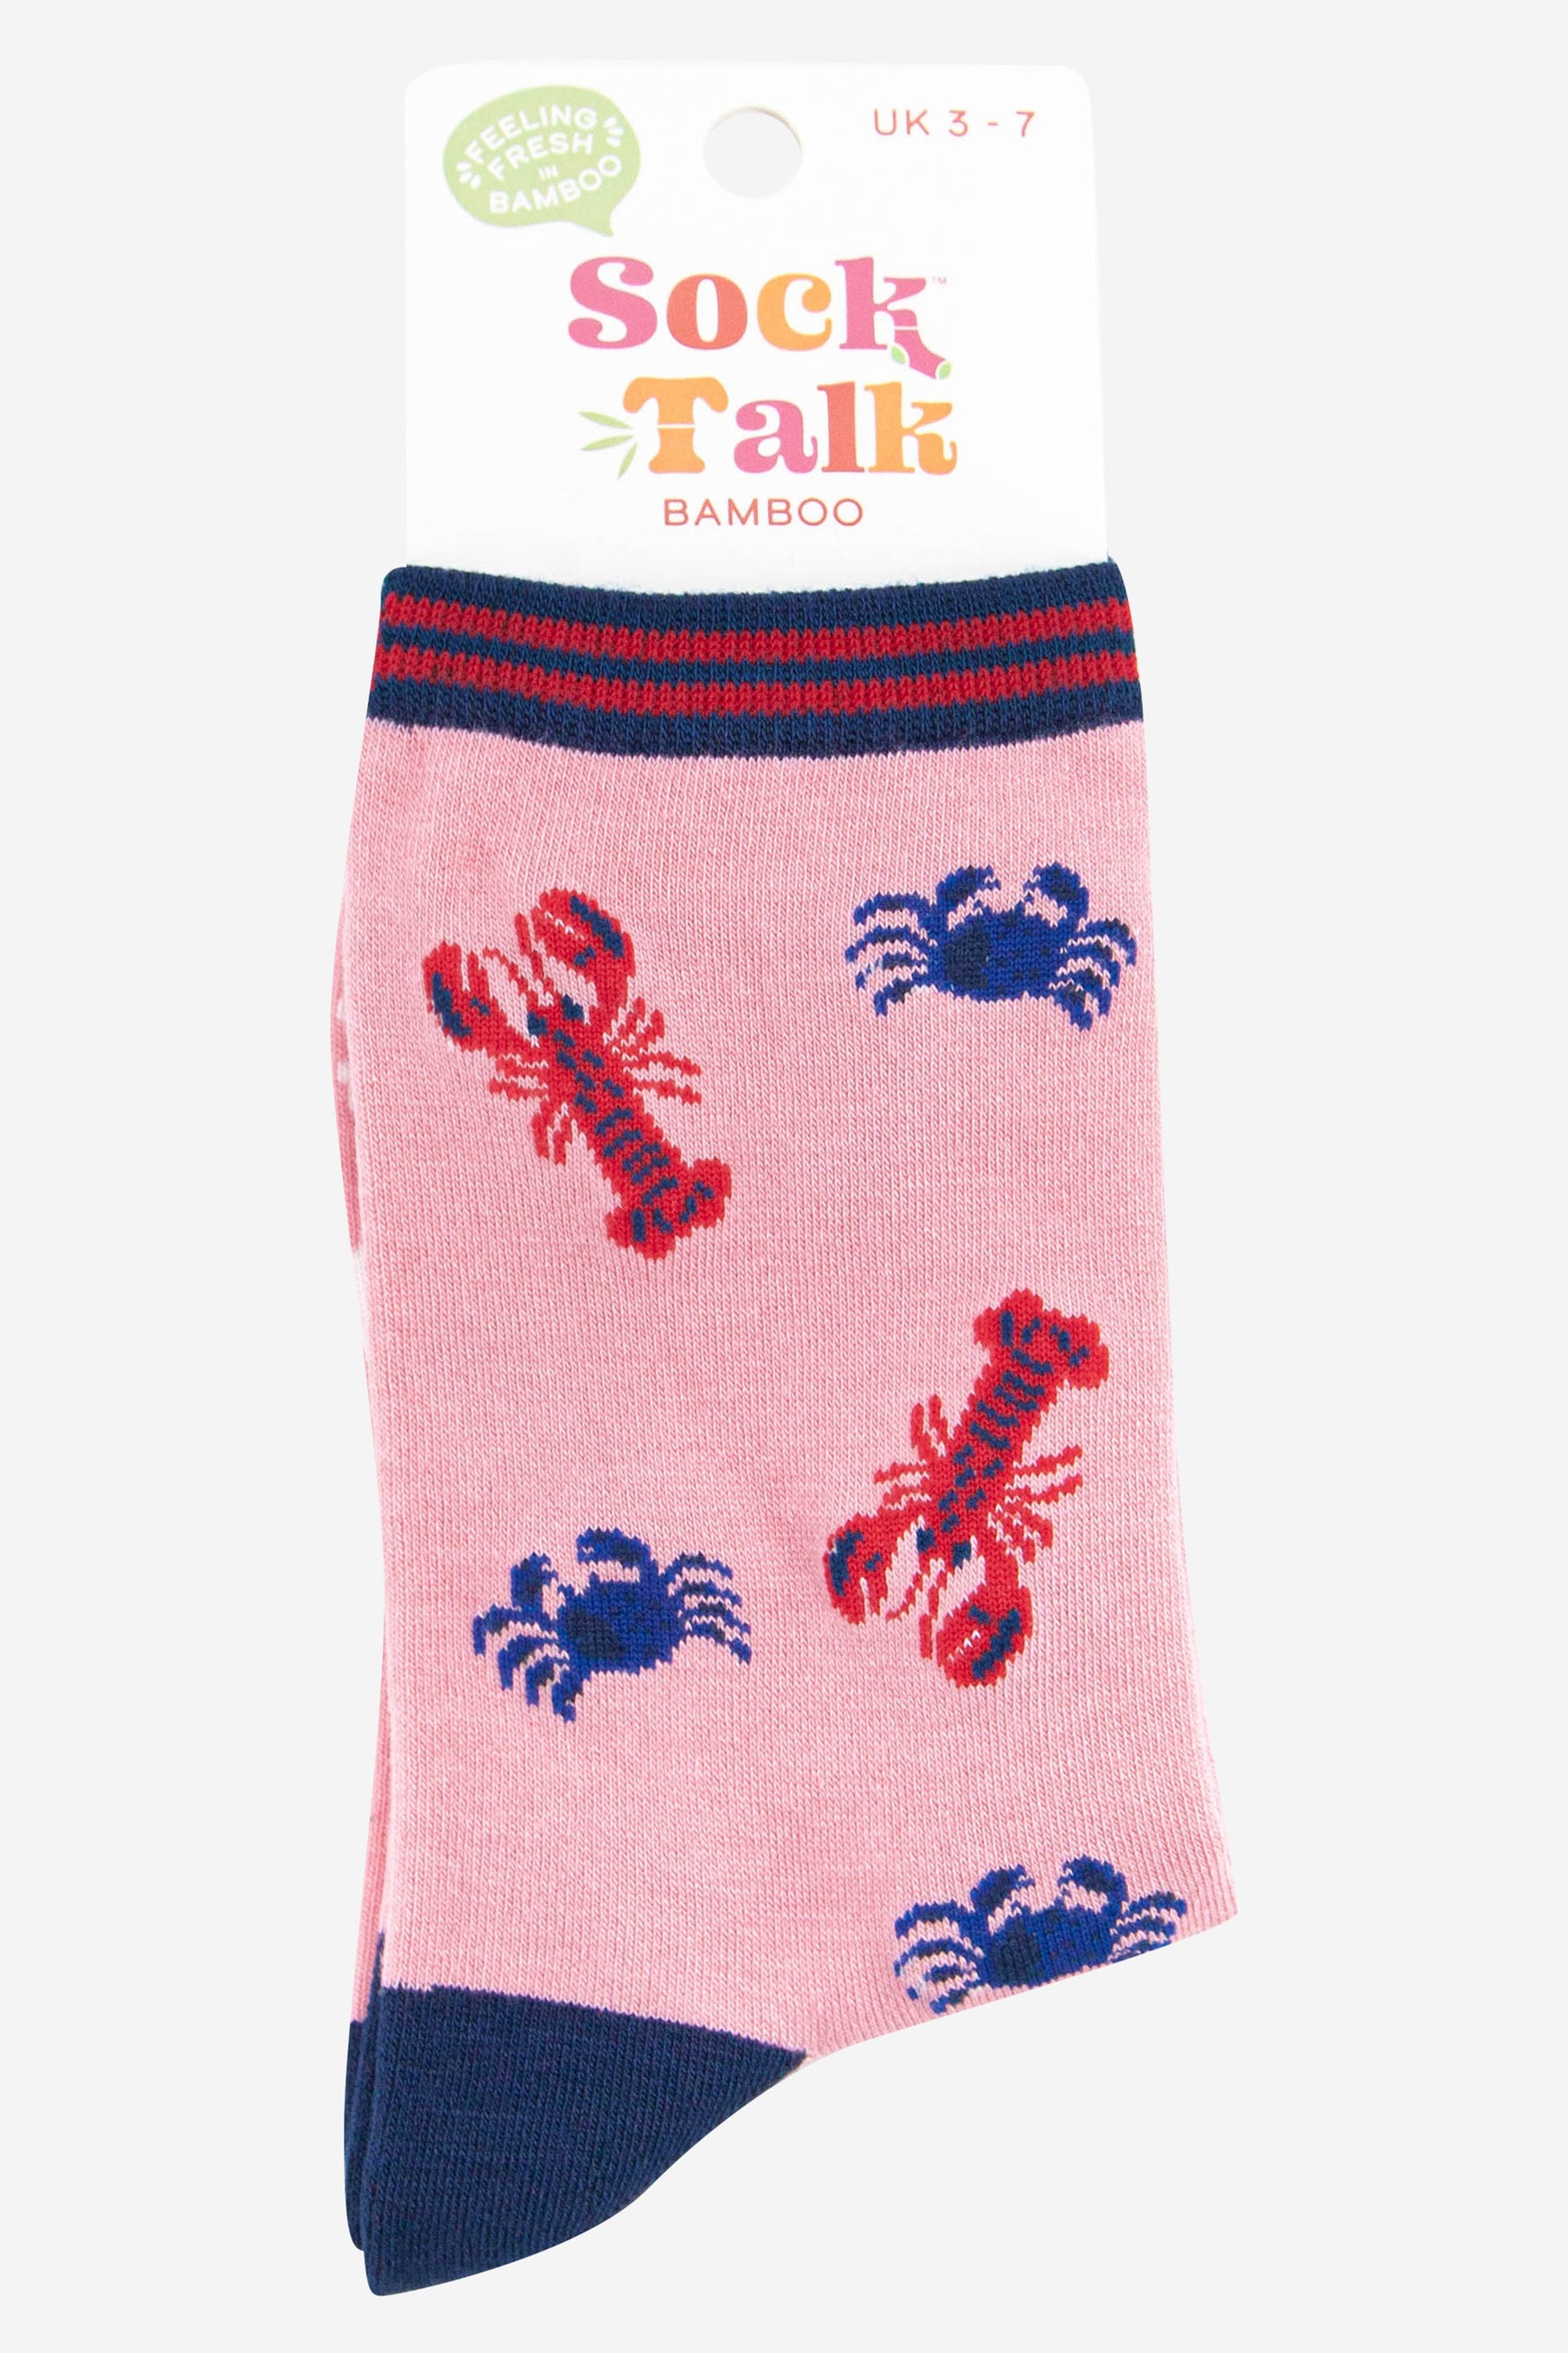 womens bamboo lobster and crab ankle socks uk size 3-7